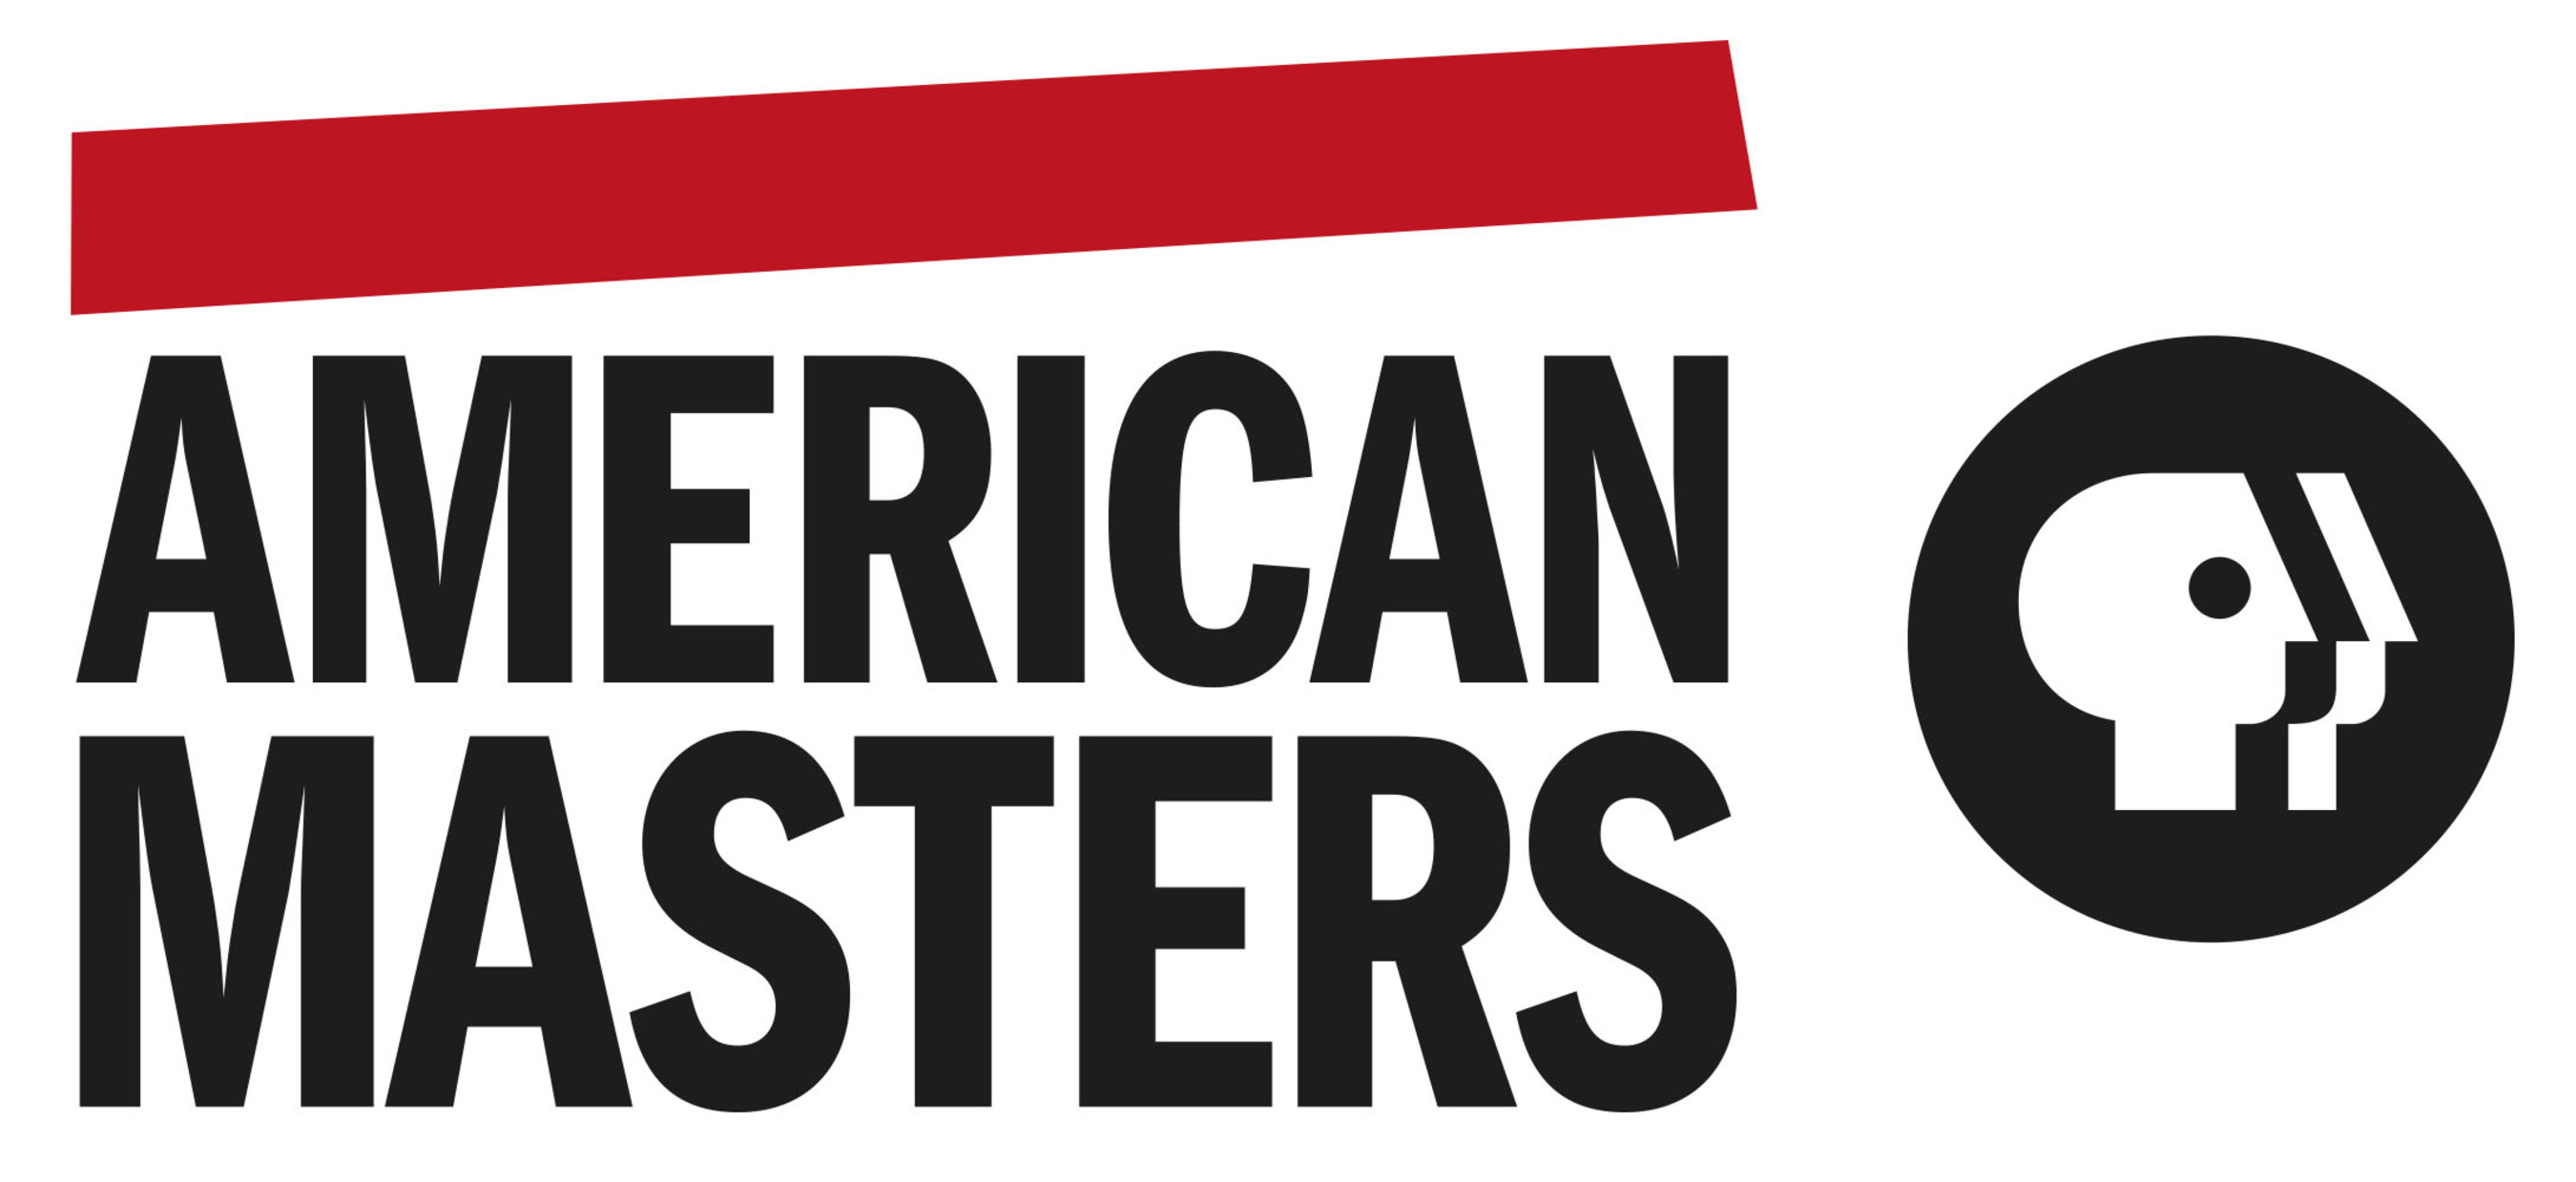 "American Masters," THIRTEEN's award-winning biography series, explores the lives and creative journeys of America's most enduring artistic and cultural giants. With insight and originality, the series illuminates the extraordinary mosaic of our nation's landscape, heritage and traditions. Watch full episodes and more at http://pbs.org/americanmasters.